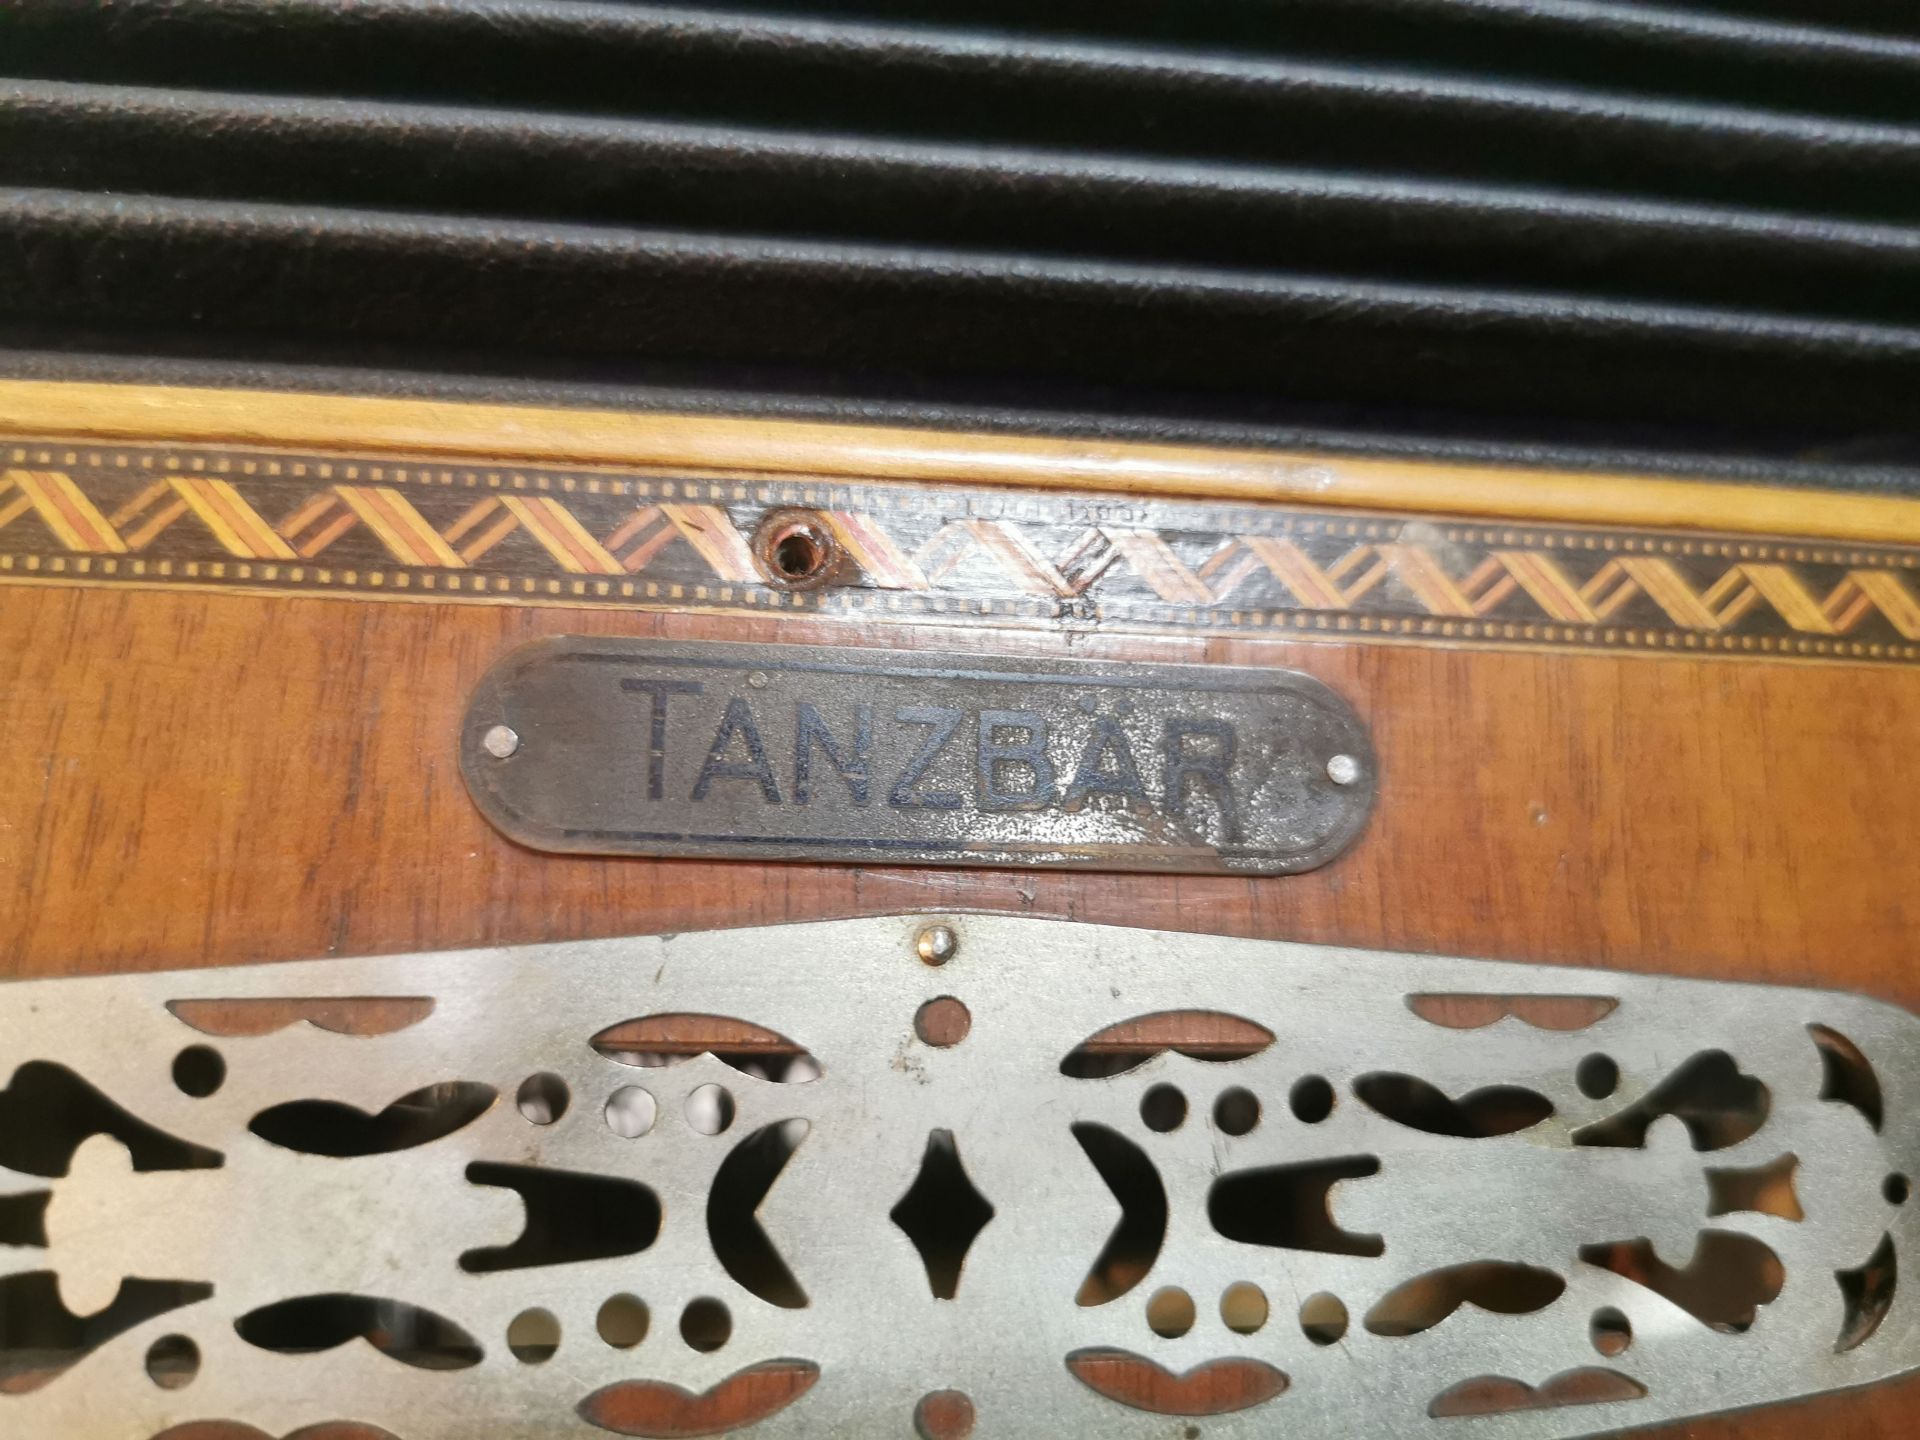 Tanzbär 30-Note Music Roll Operated Concertina ca. 1910  - Image 7 of 9